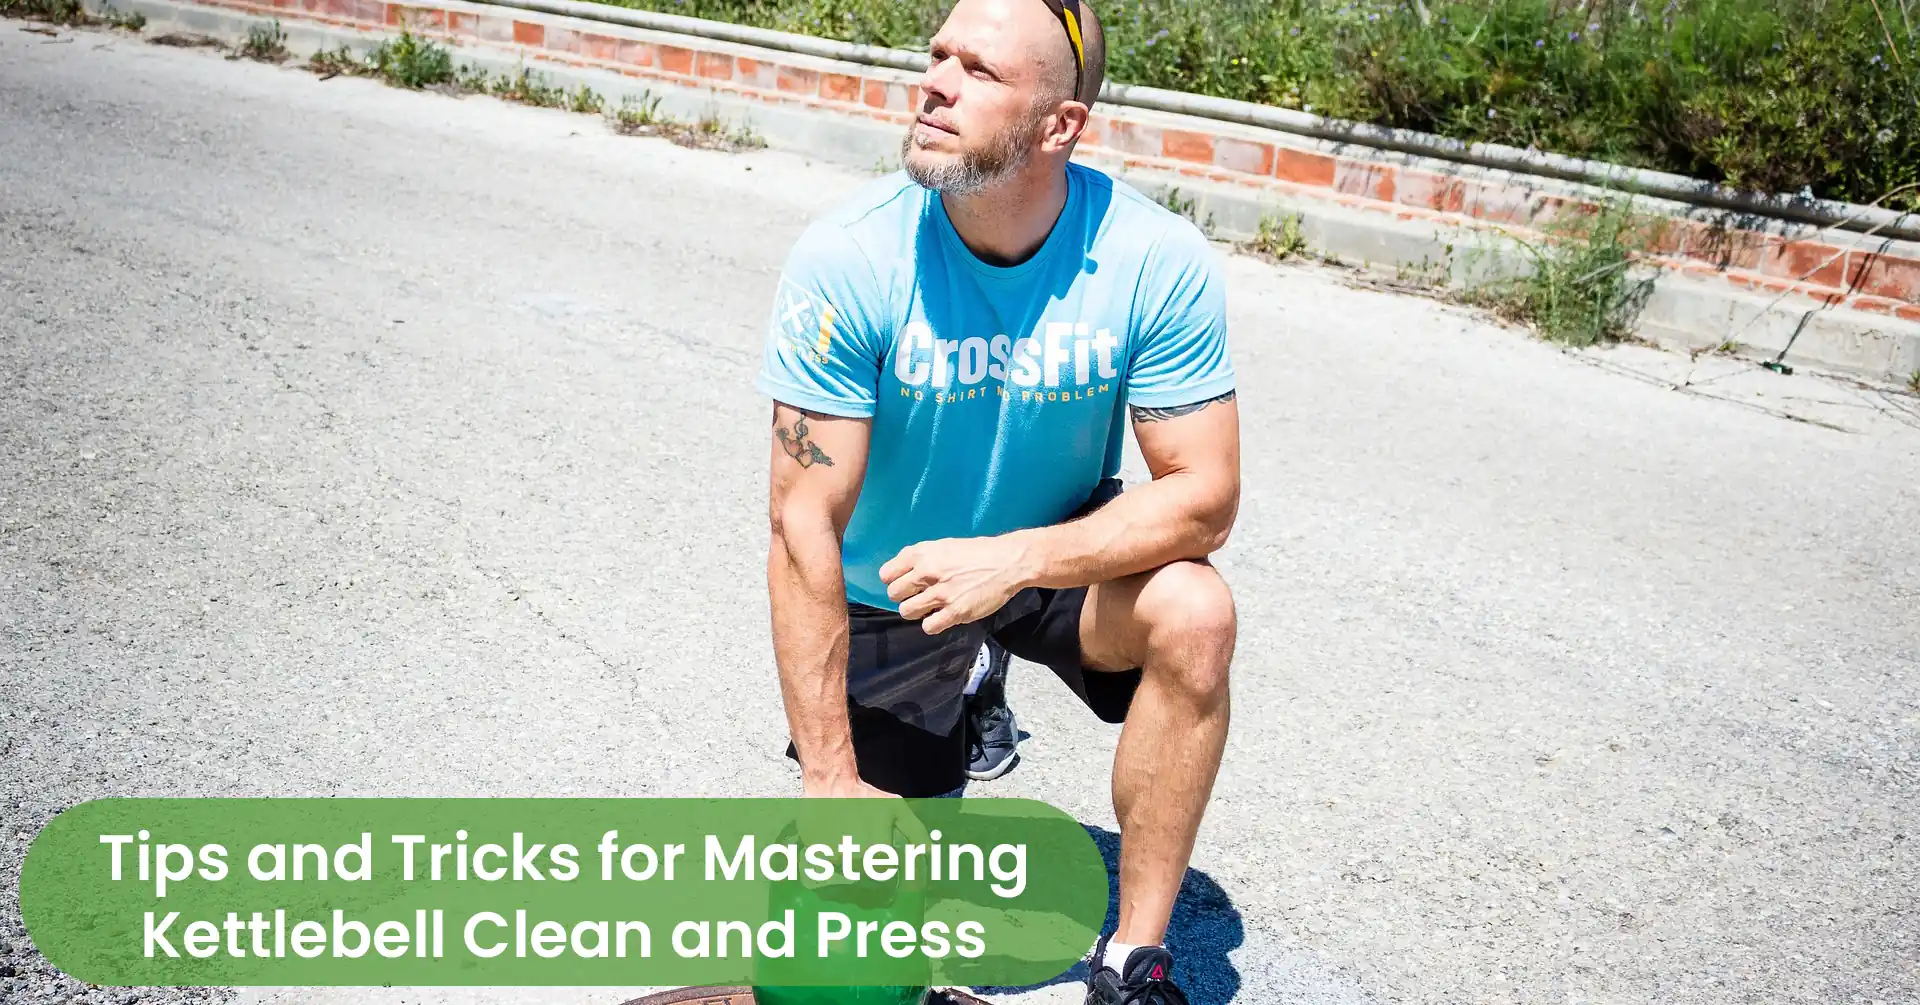 Tips and Tricks for Mastering Kettlebell Clean and Press